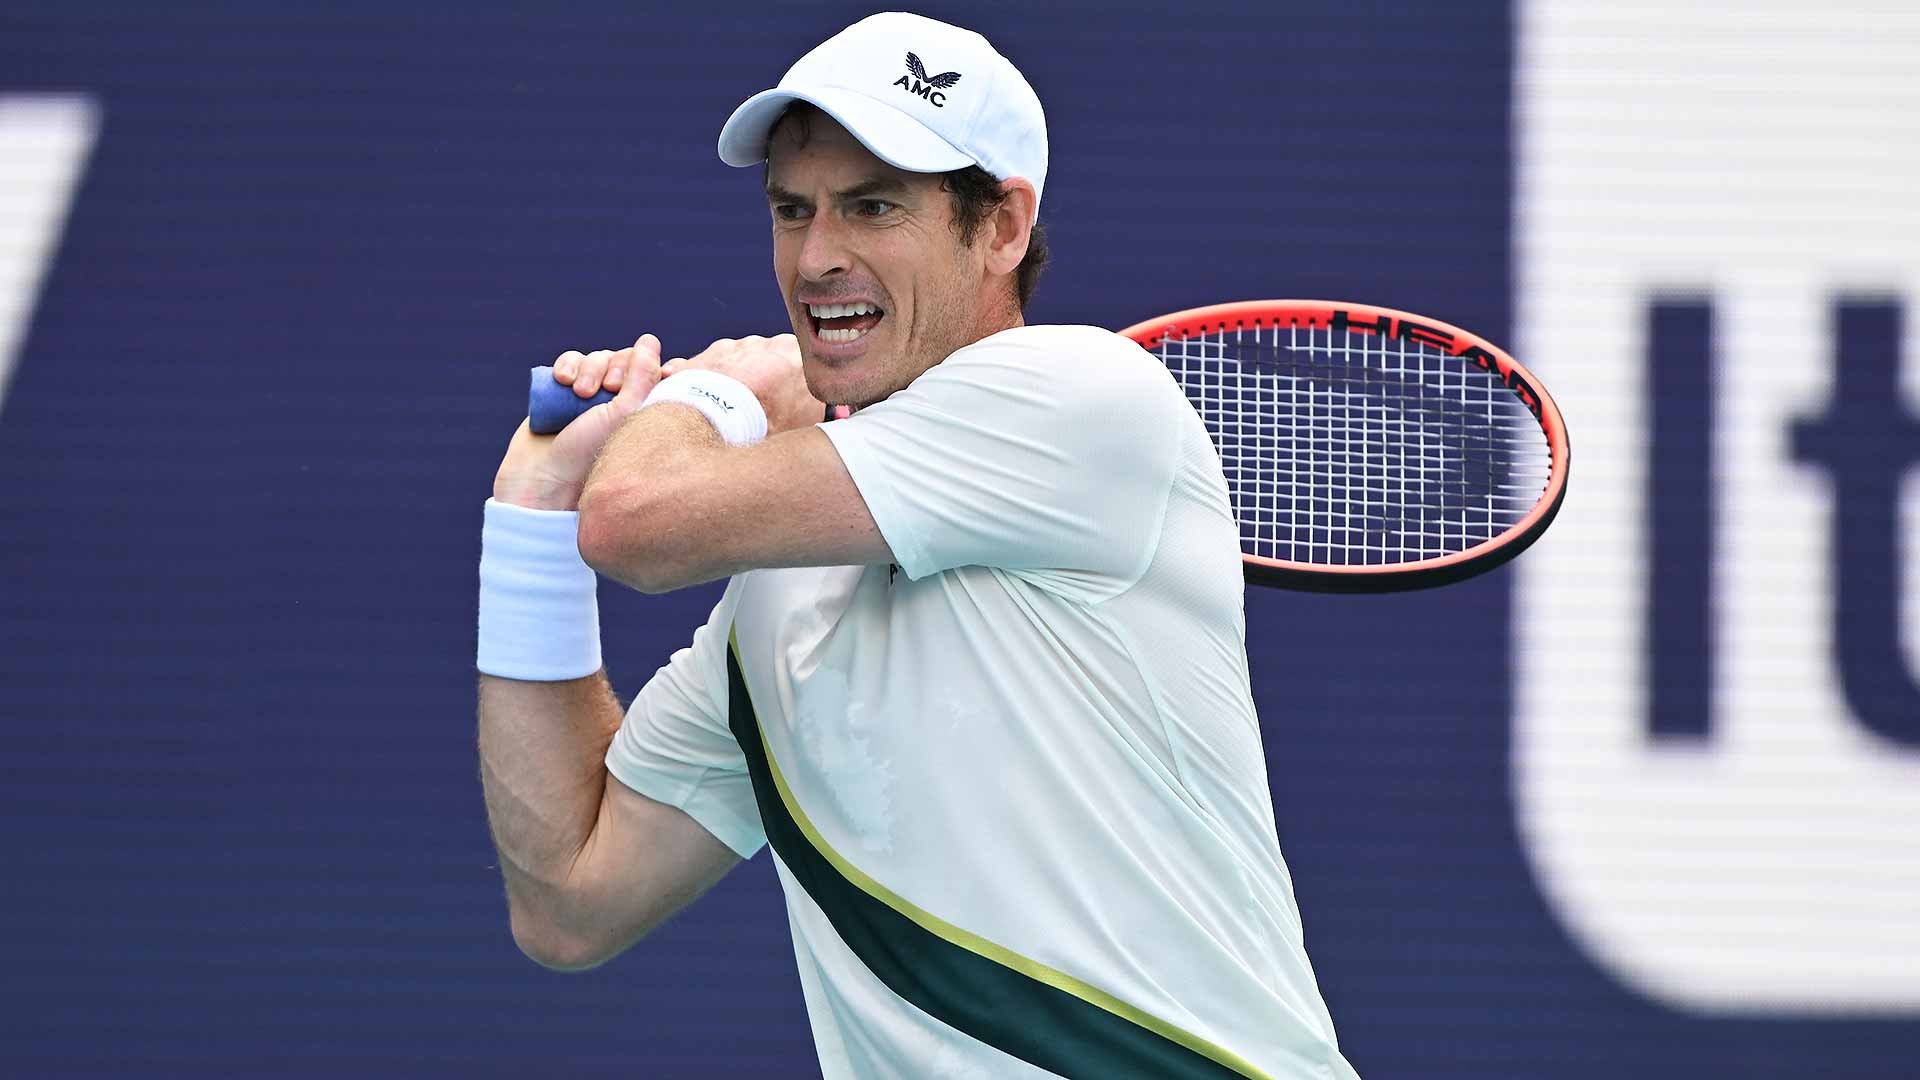 Andy Murray conceded three service breaks in his straight-sets loss to Dusan Lajovic.